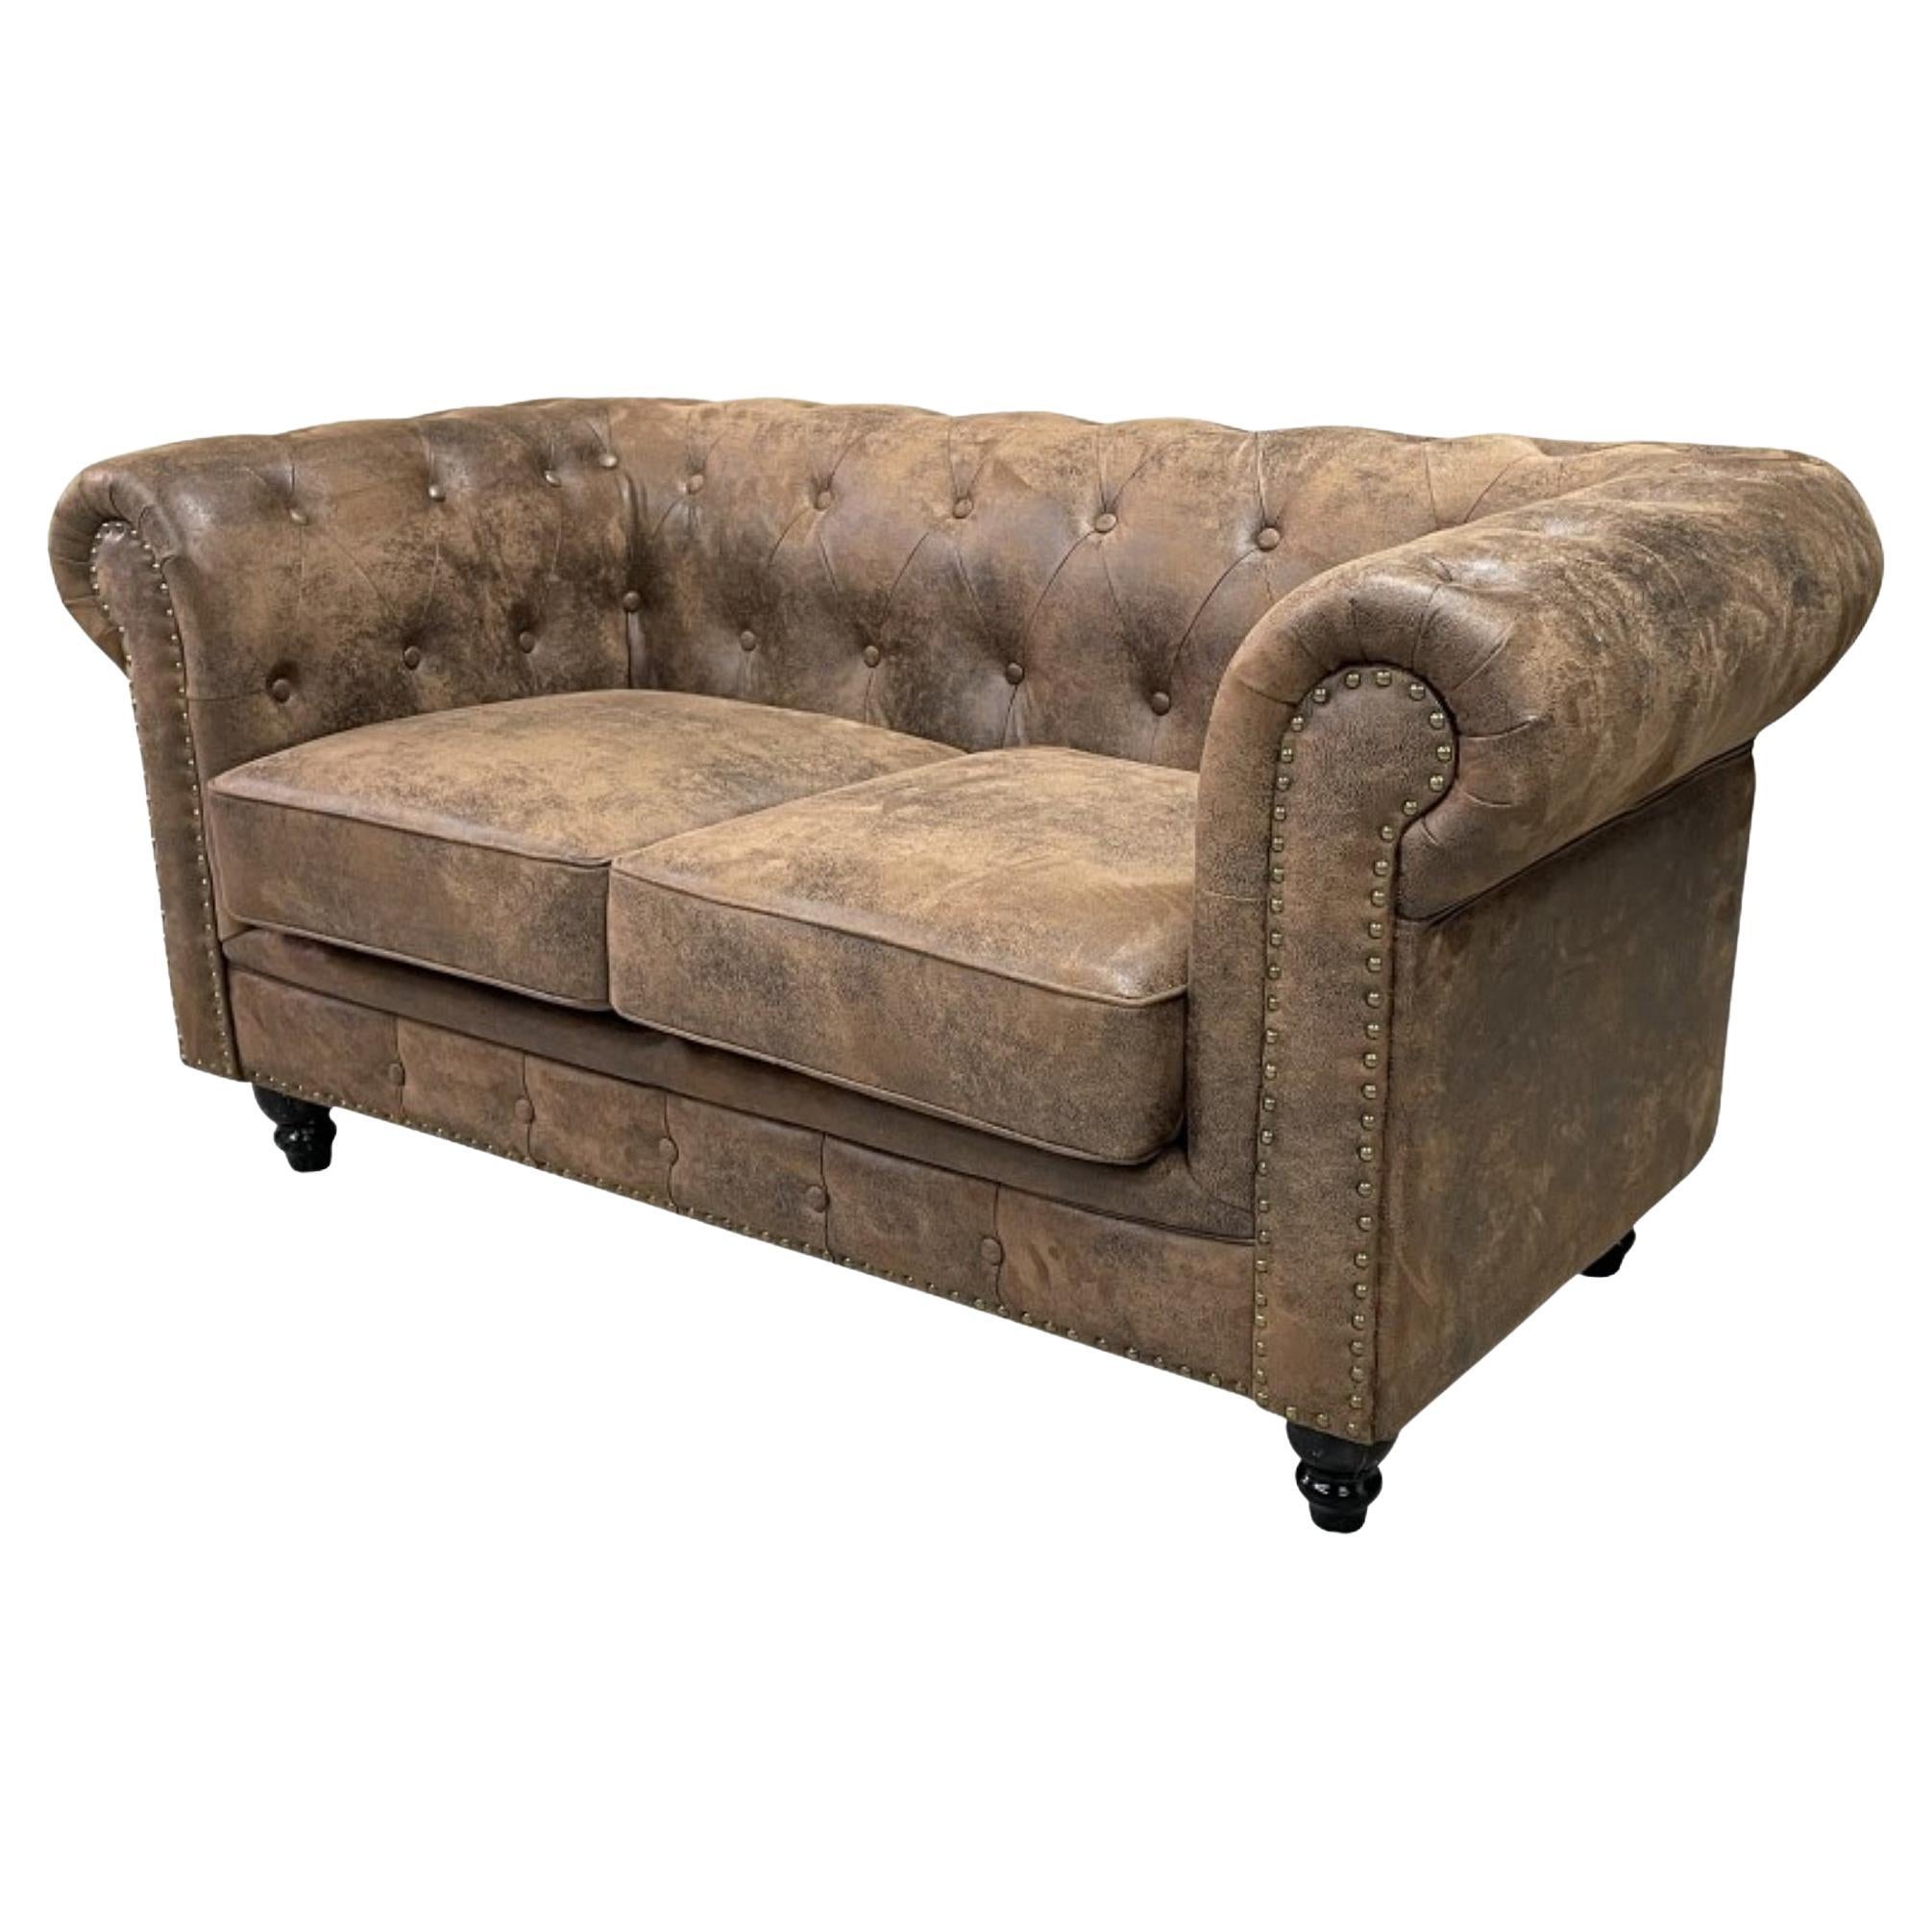 New Chester Premium 2 Seater Sofa Vintage Faux Leather For Sale